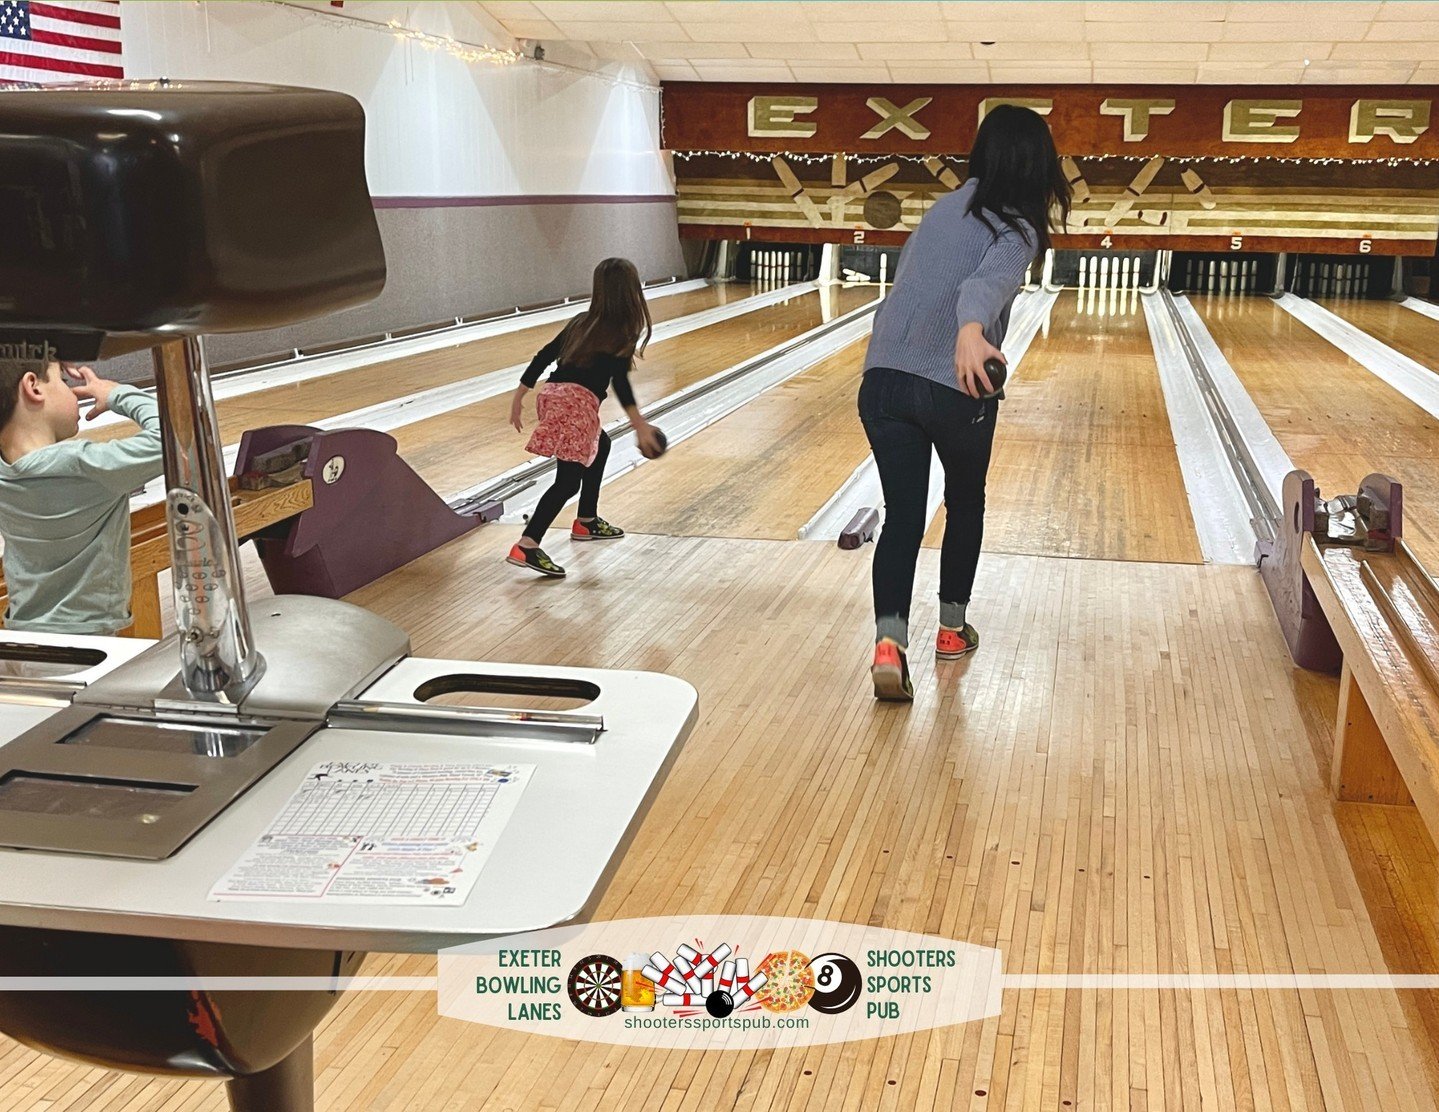 Hey, families, let's have some fun! 🎉 Children of all ages can join the excitement with Kids Candlepin Bowling &mdash; bumpers up or down. It's all about those smiles and strikes!⁠
⁠
Reminder -there is no open bowling on Sunday, May 19